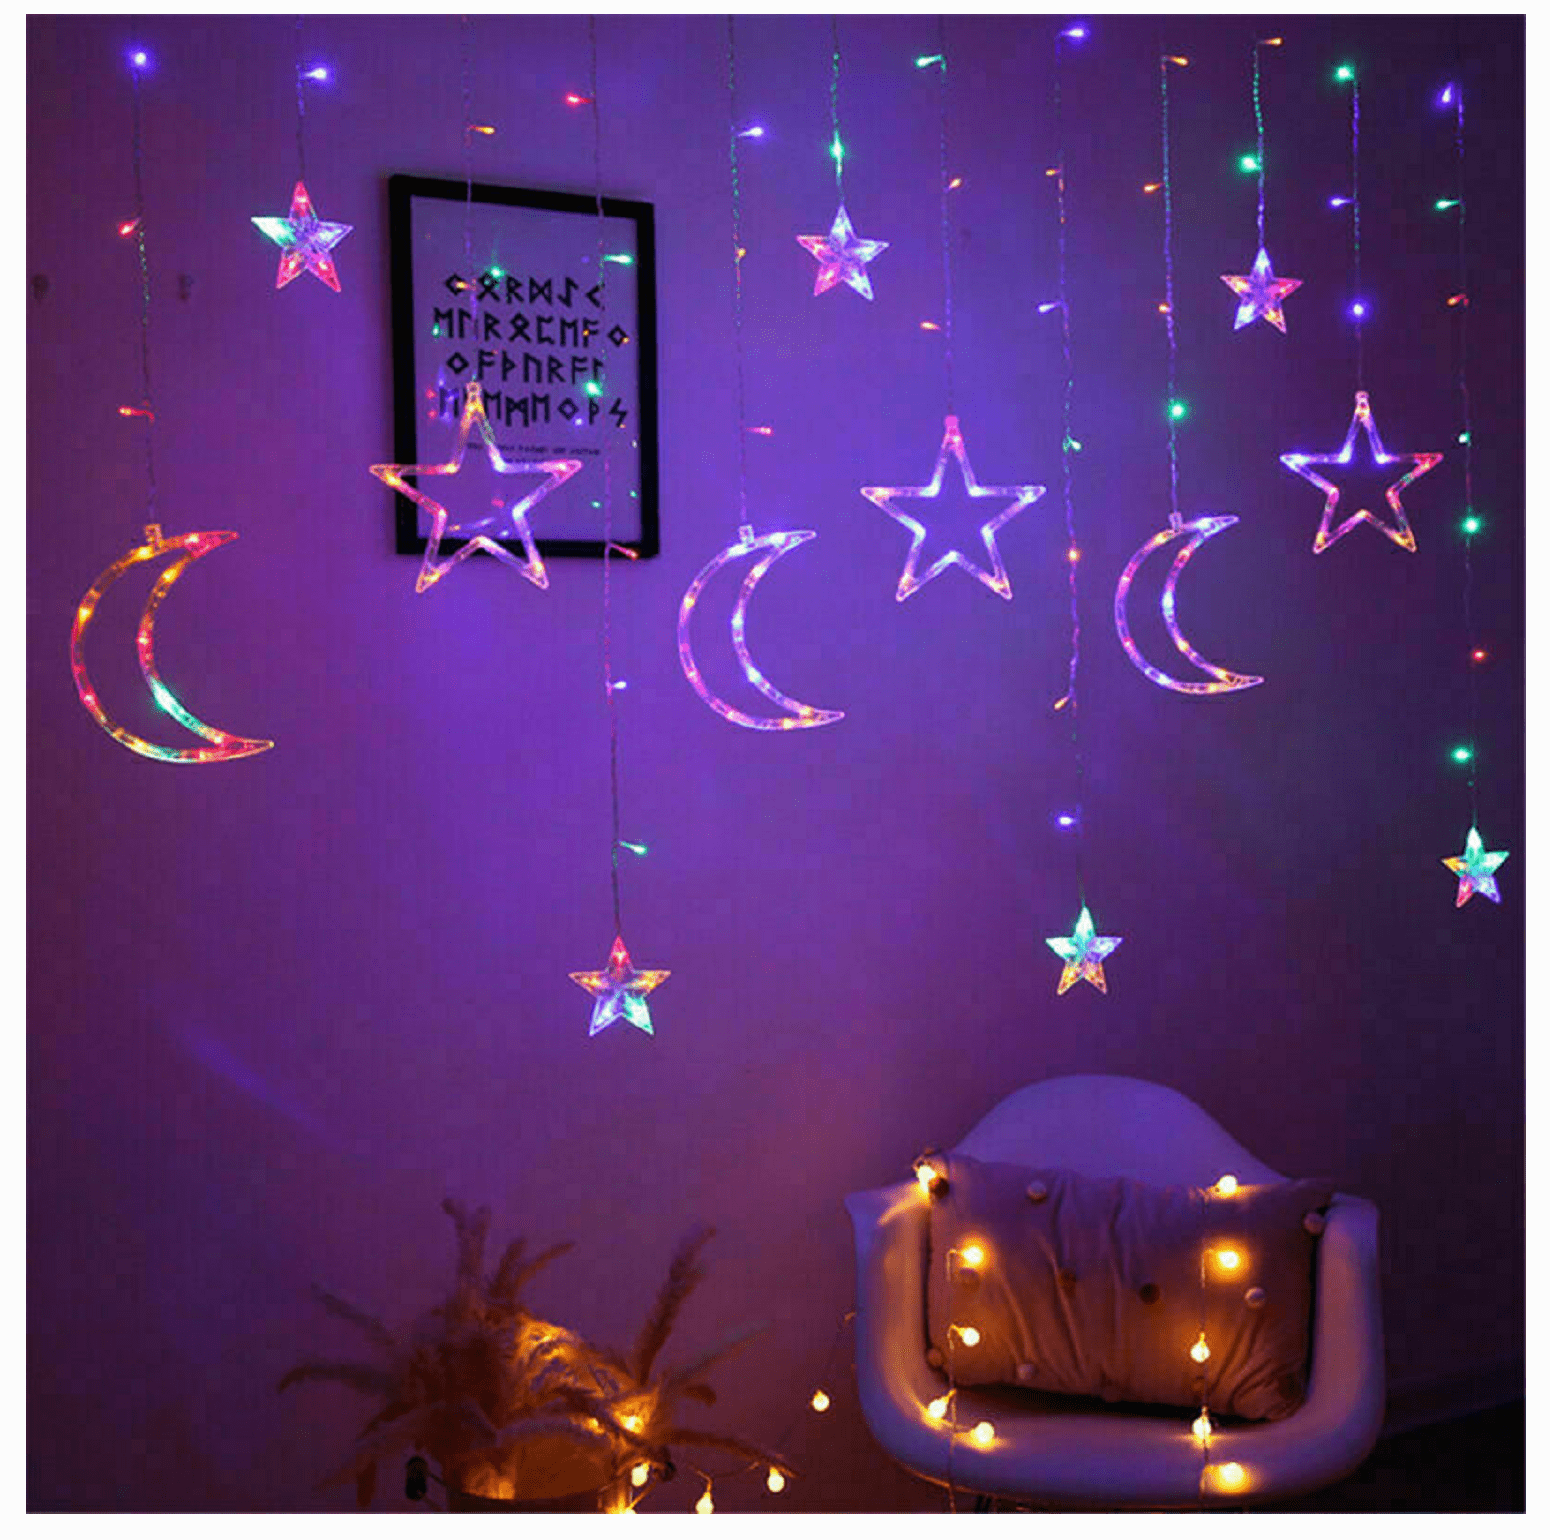 Details about   LED String Lights Star and moon Curtain Light Fairy Wedding Birthday Home Decor 